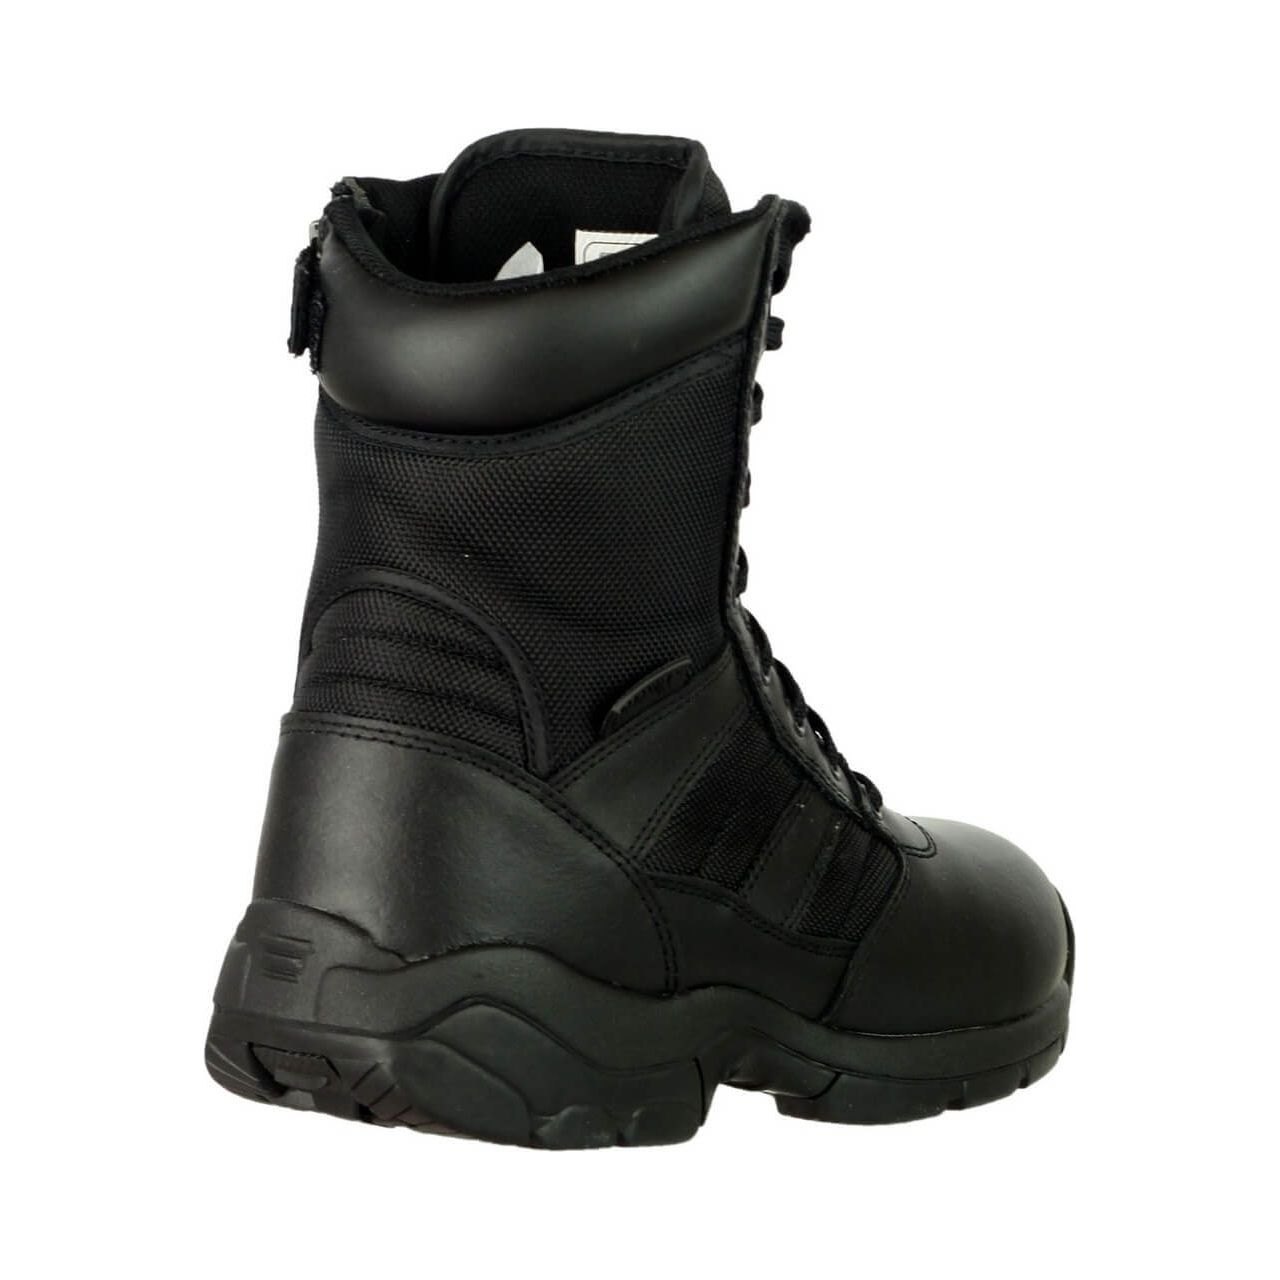 Magnum Panther 8" Side-Zip Boots"-Black-2